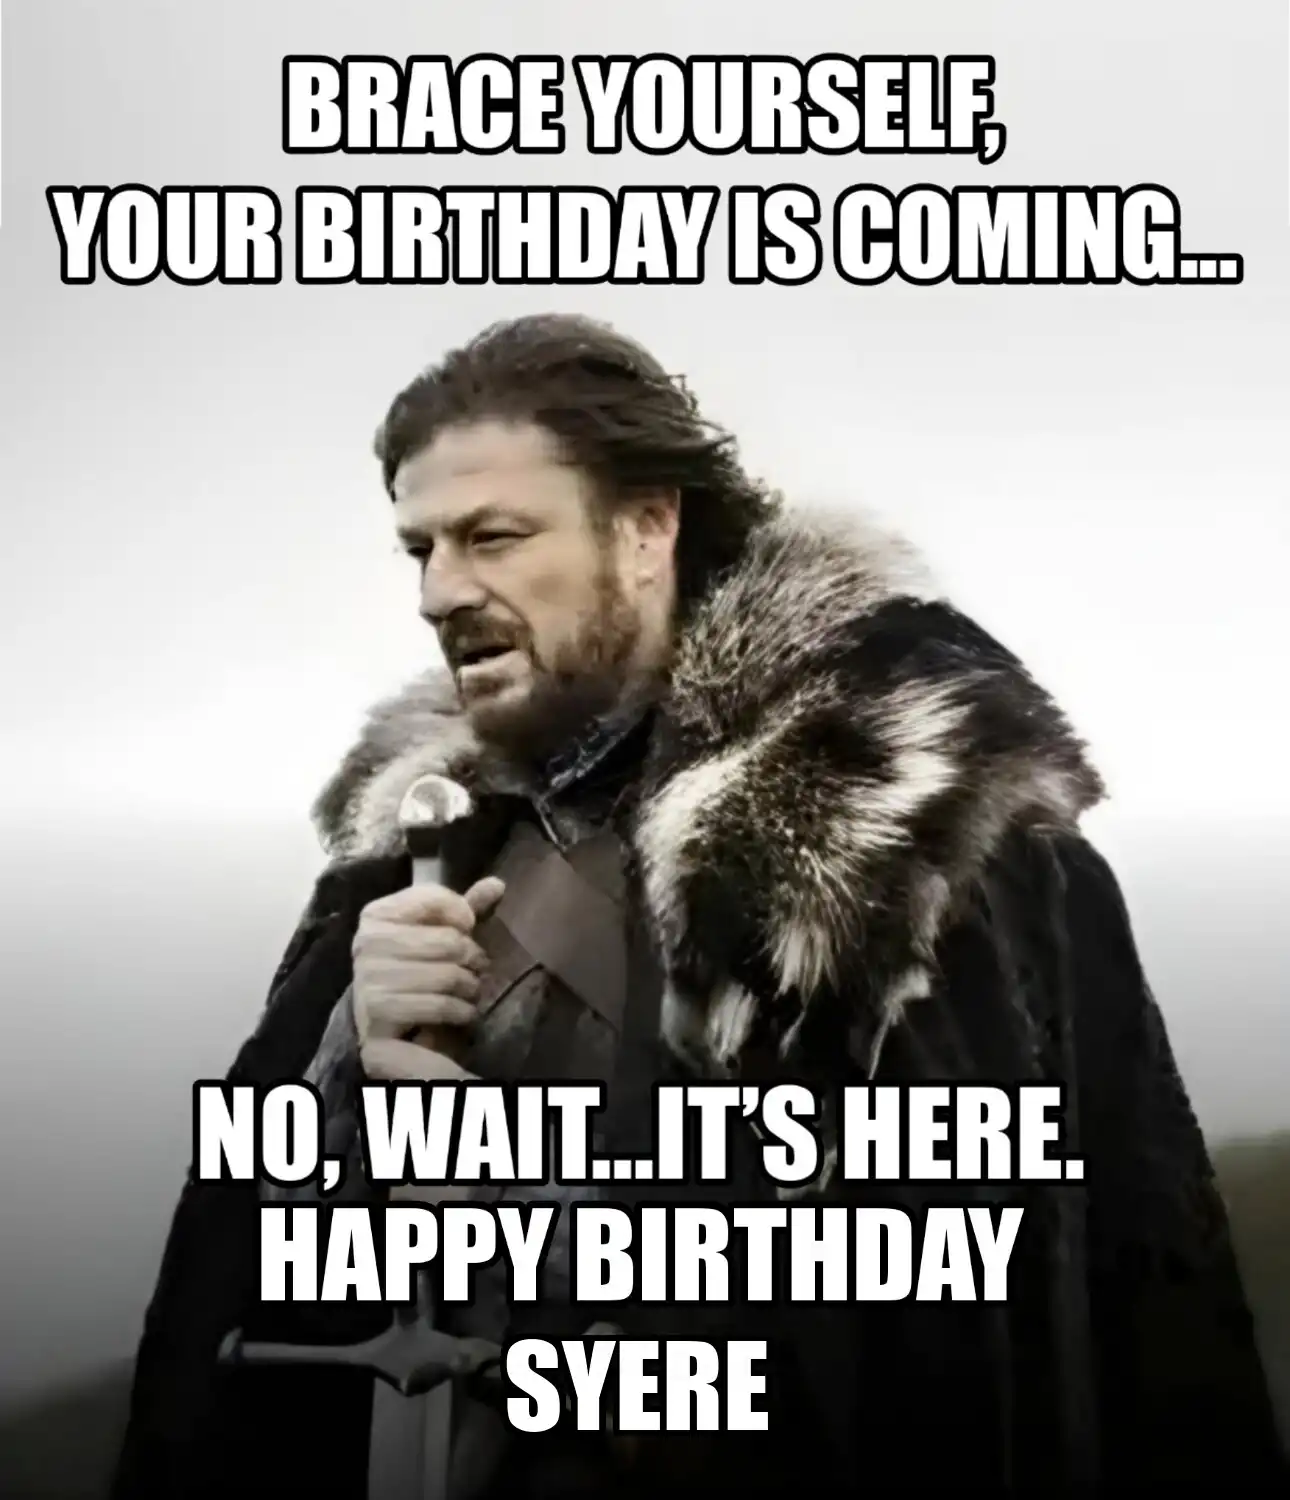 Happy Birthday Syere Brace Yourself Your Birthday Is Coming Meme